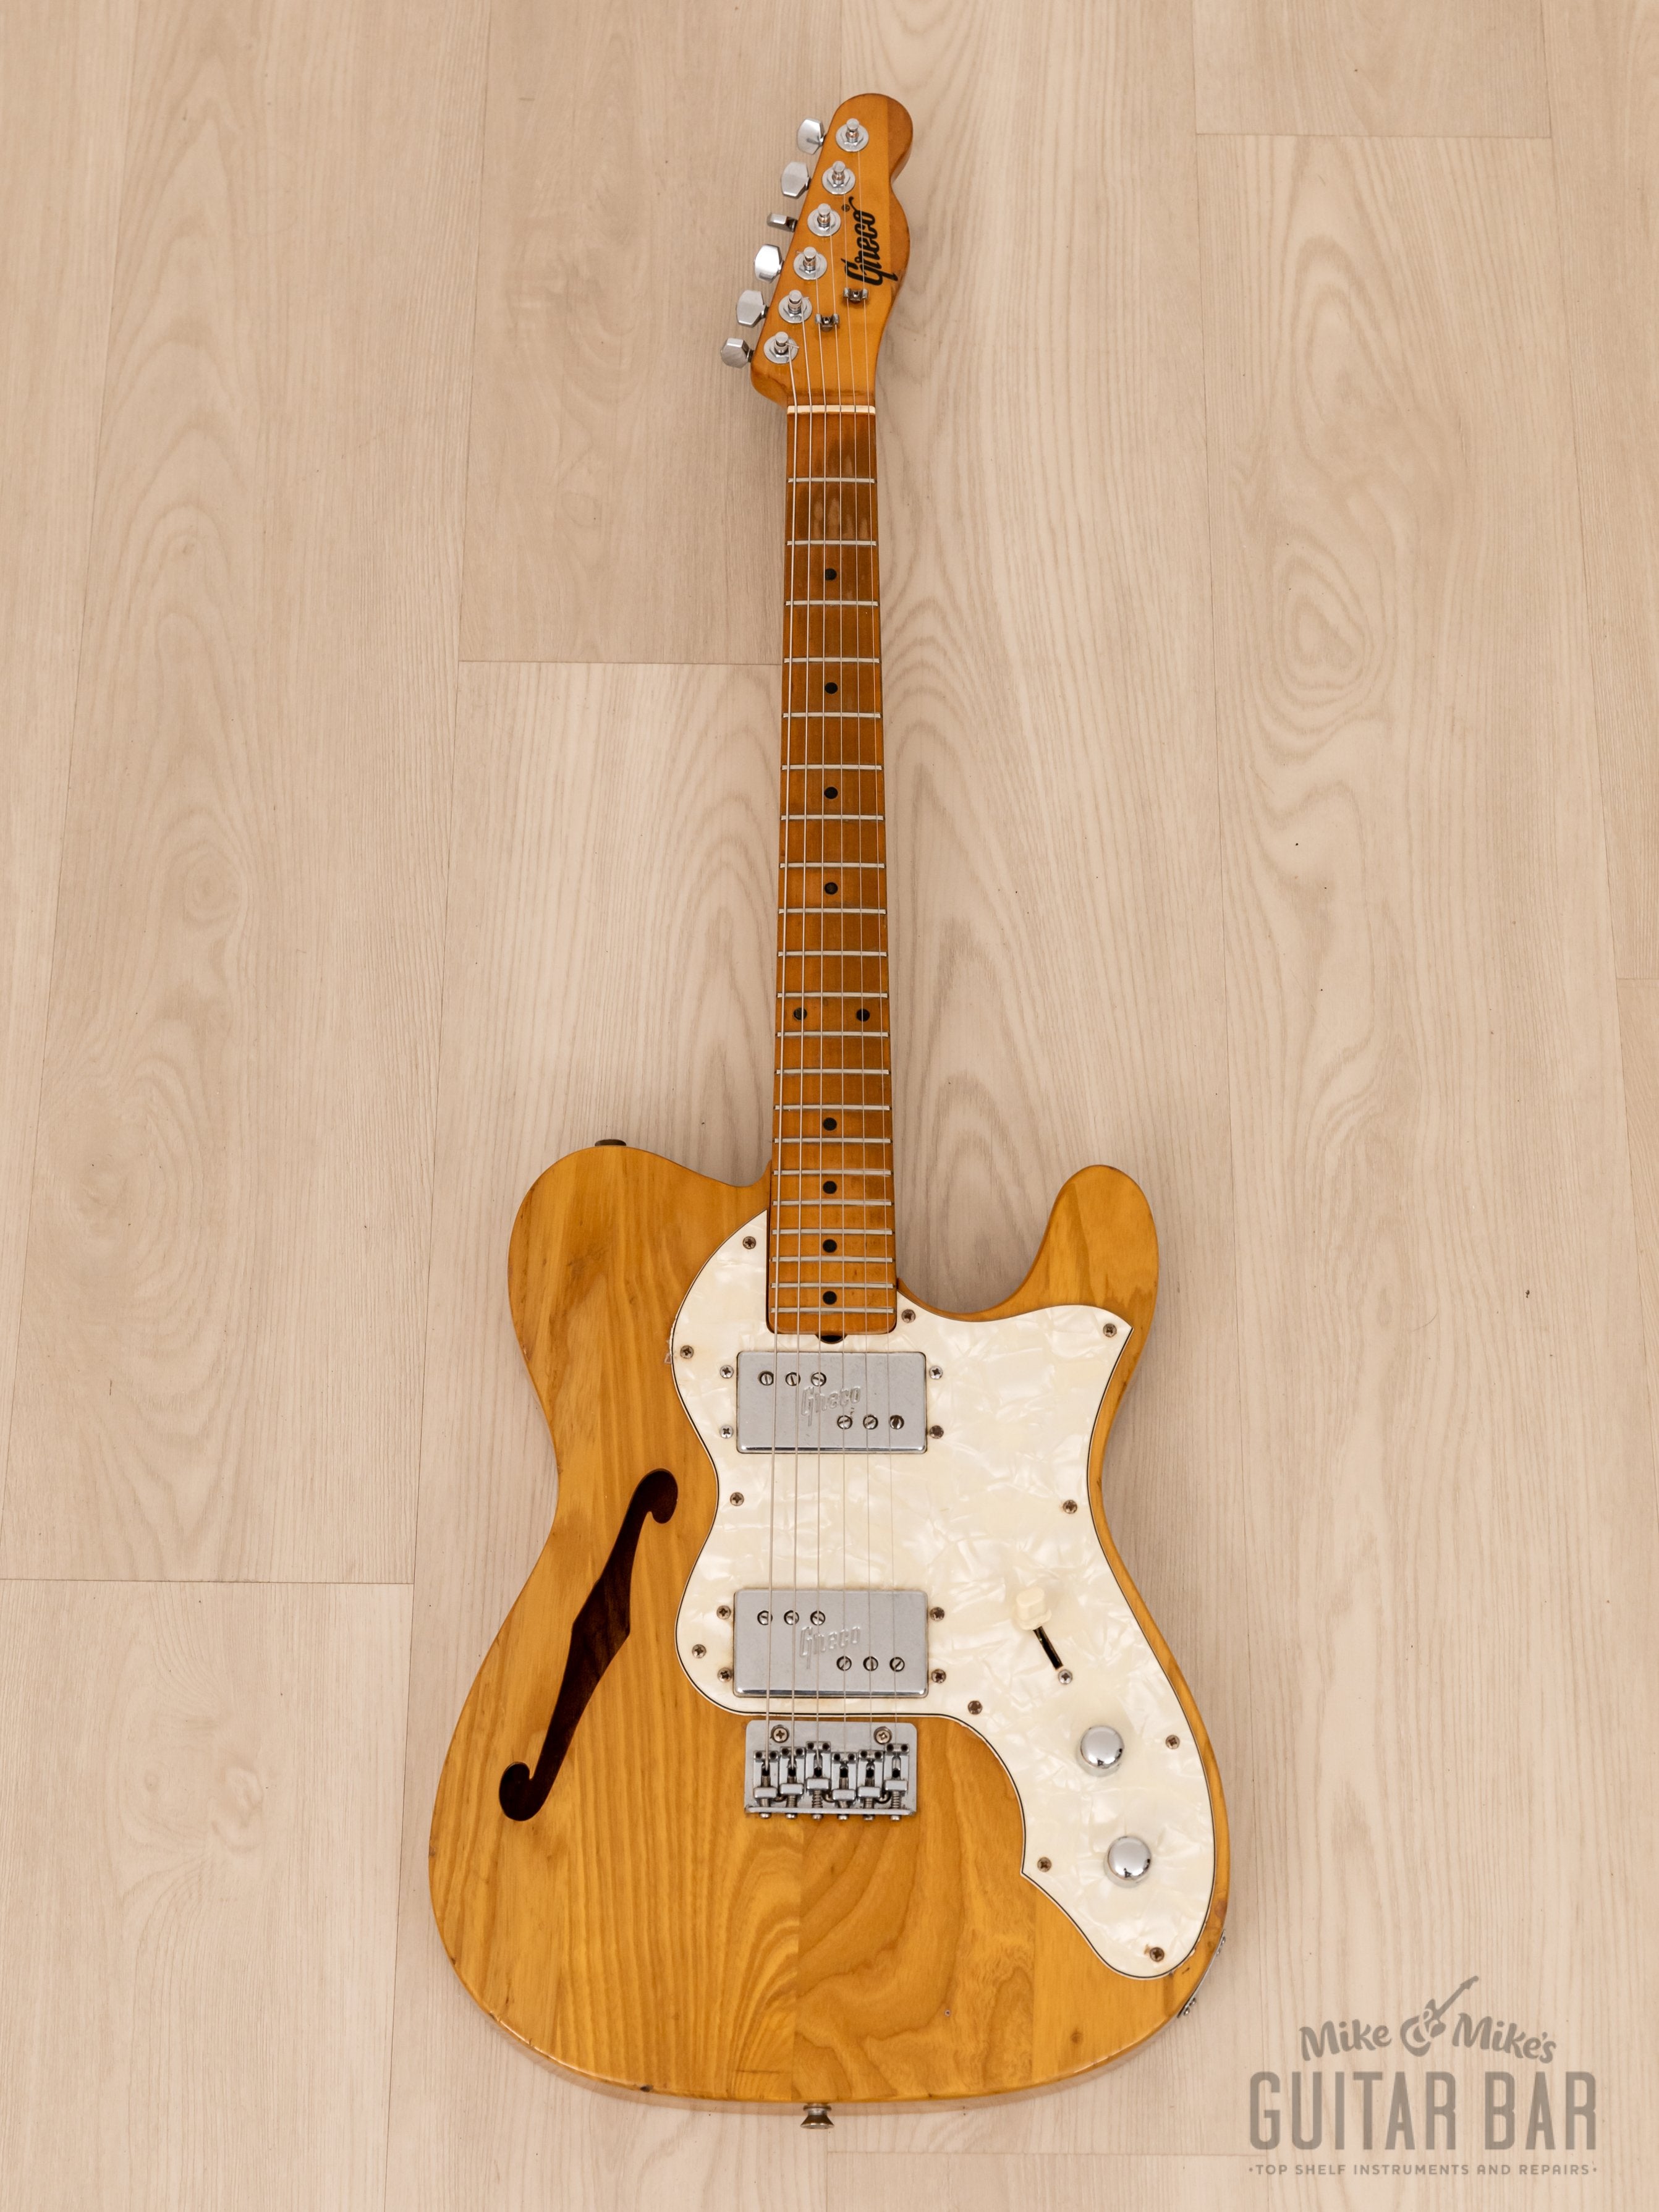 1974 Greco Spacey Sounds TE-500 Thinline T-Style Semi-Hollow Electric Guitar, Japan Matsumoku